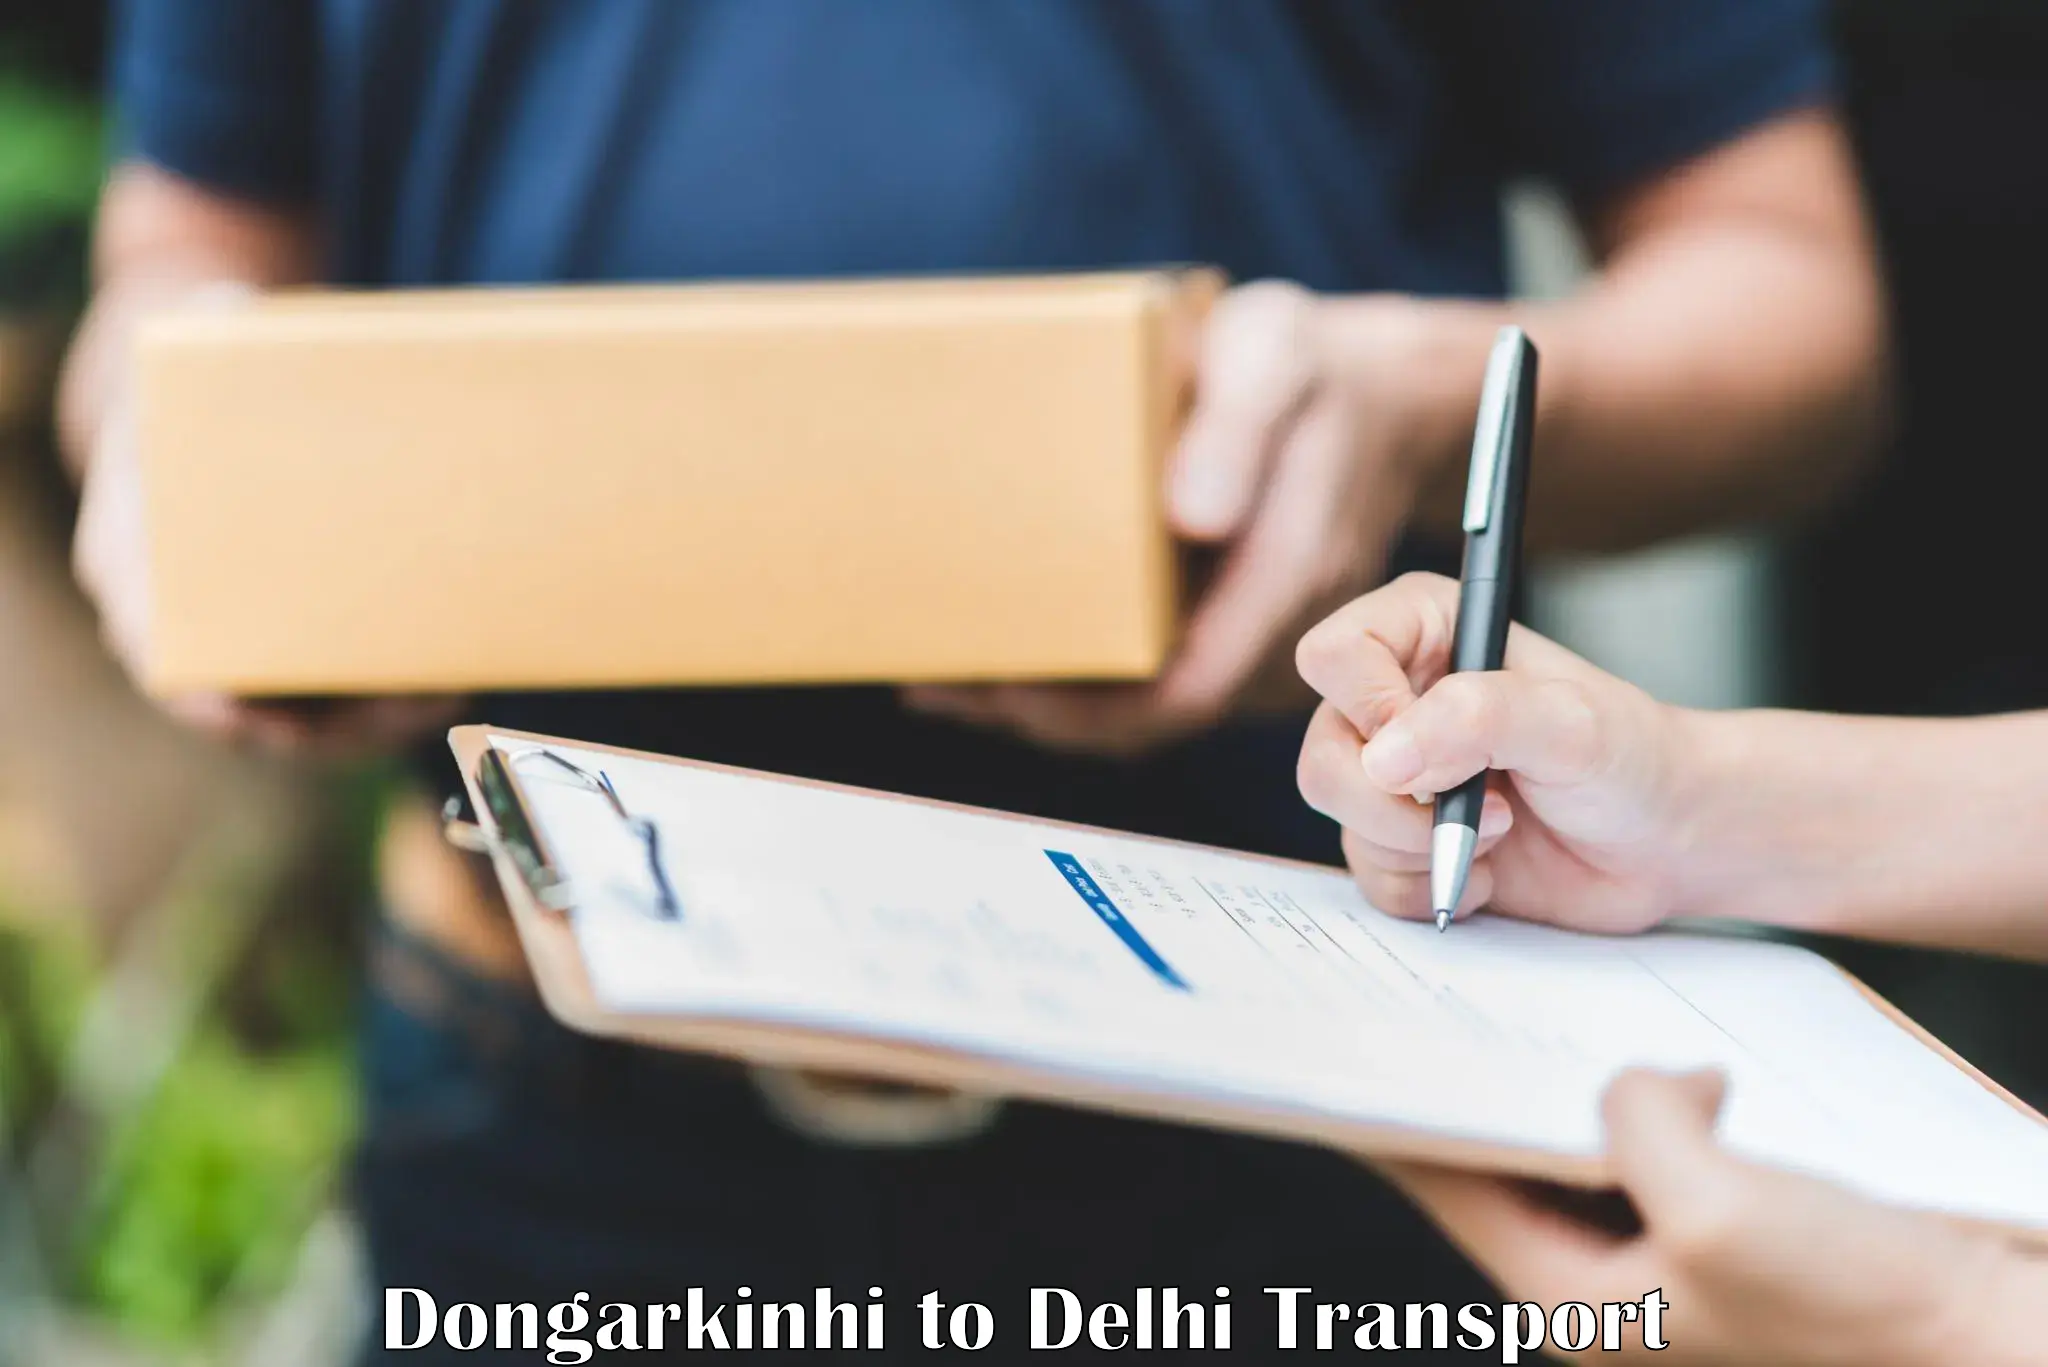 Commercial transport service Dongarkinhi to Delhi